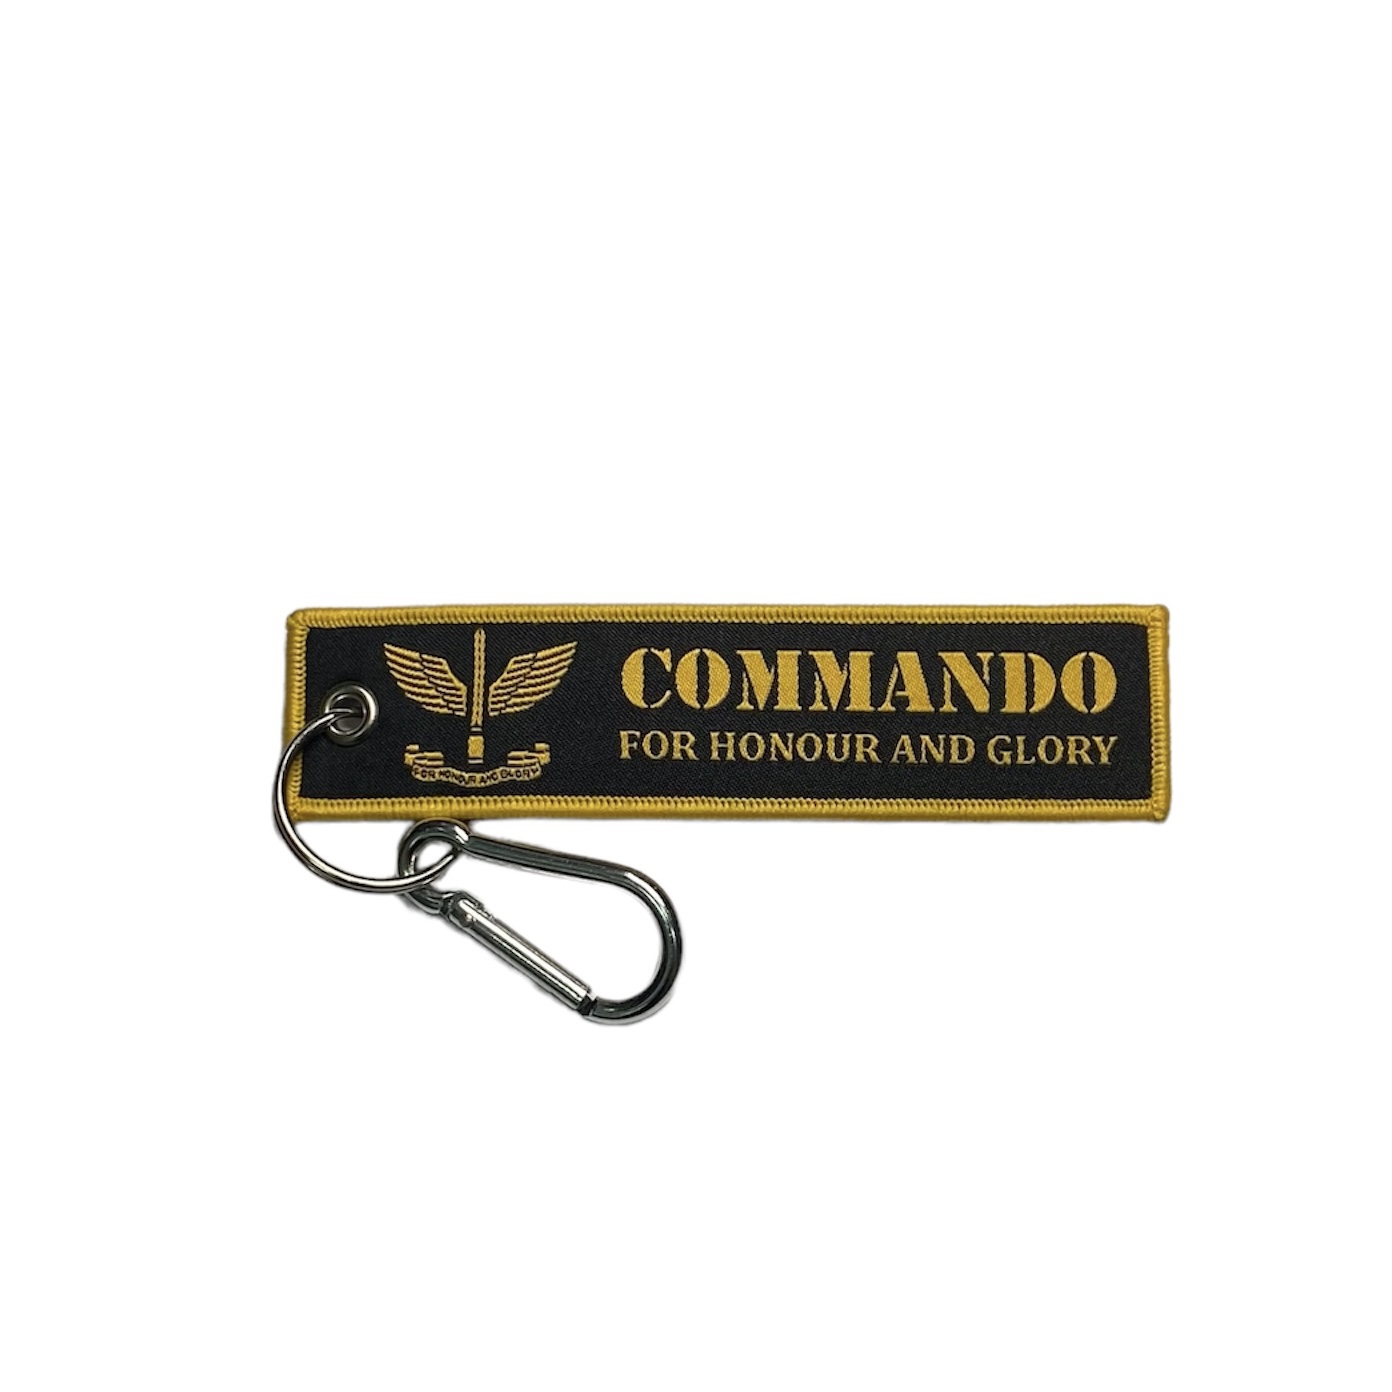 Commando "For Honour And Glory" Gear Tag